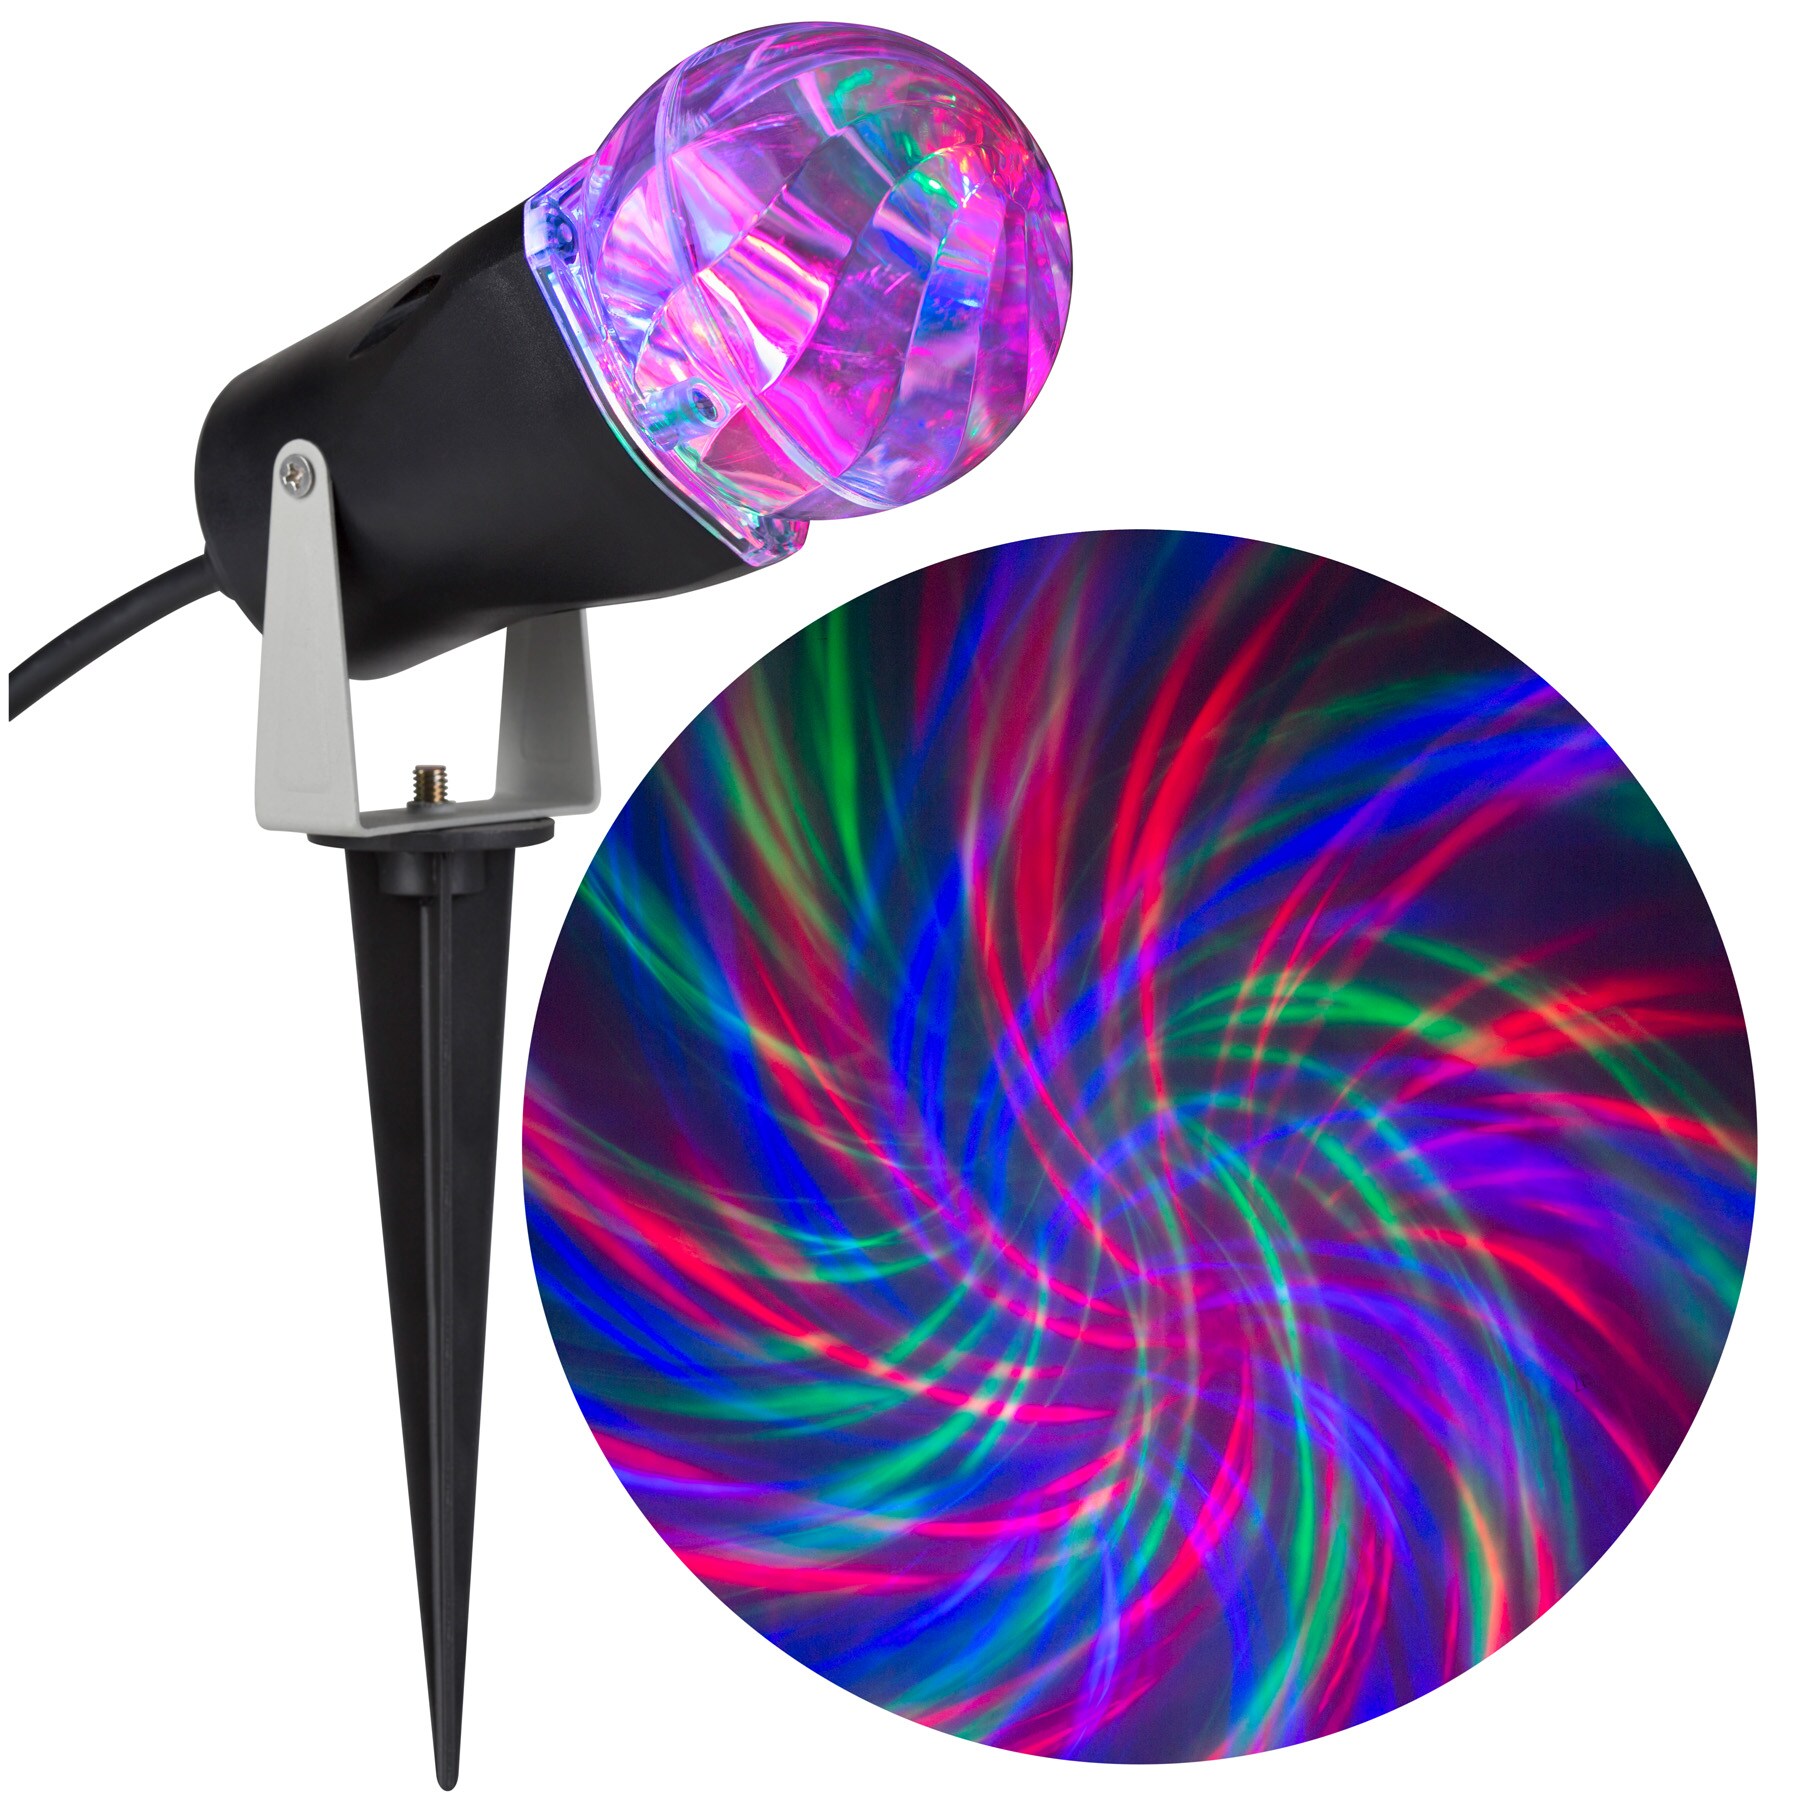 LightShow Projection Multi-function Multicolor LED Kaleidoscope Christmas 